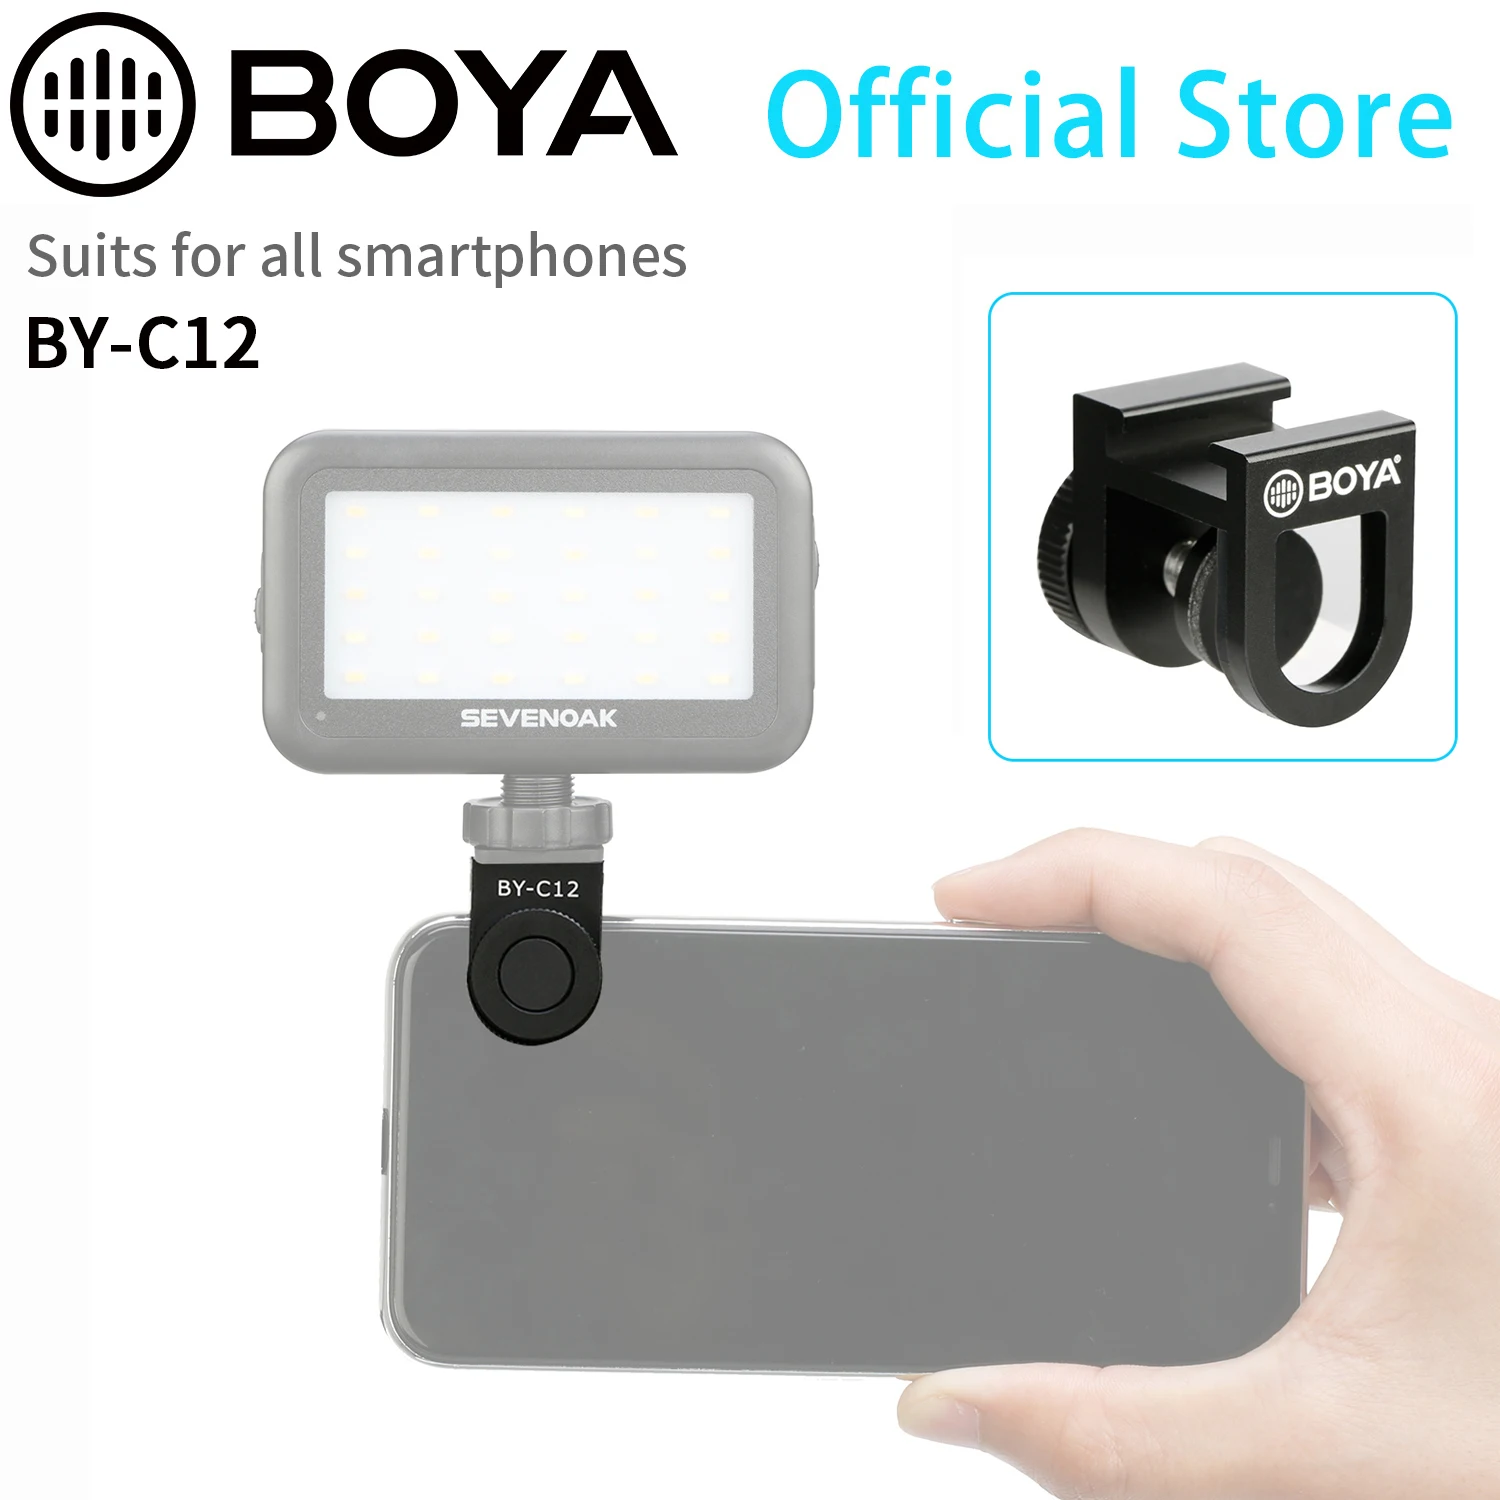 

BOYA BY-C12 Aluminum Clamp with Cold Shoe Mount for Attaching accessories Smartphone Tablet Microphone LED Light Vlog Video Live